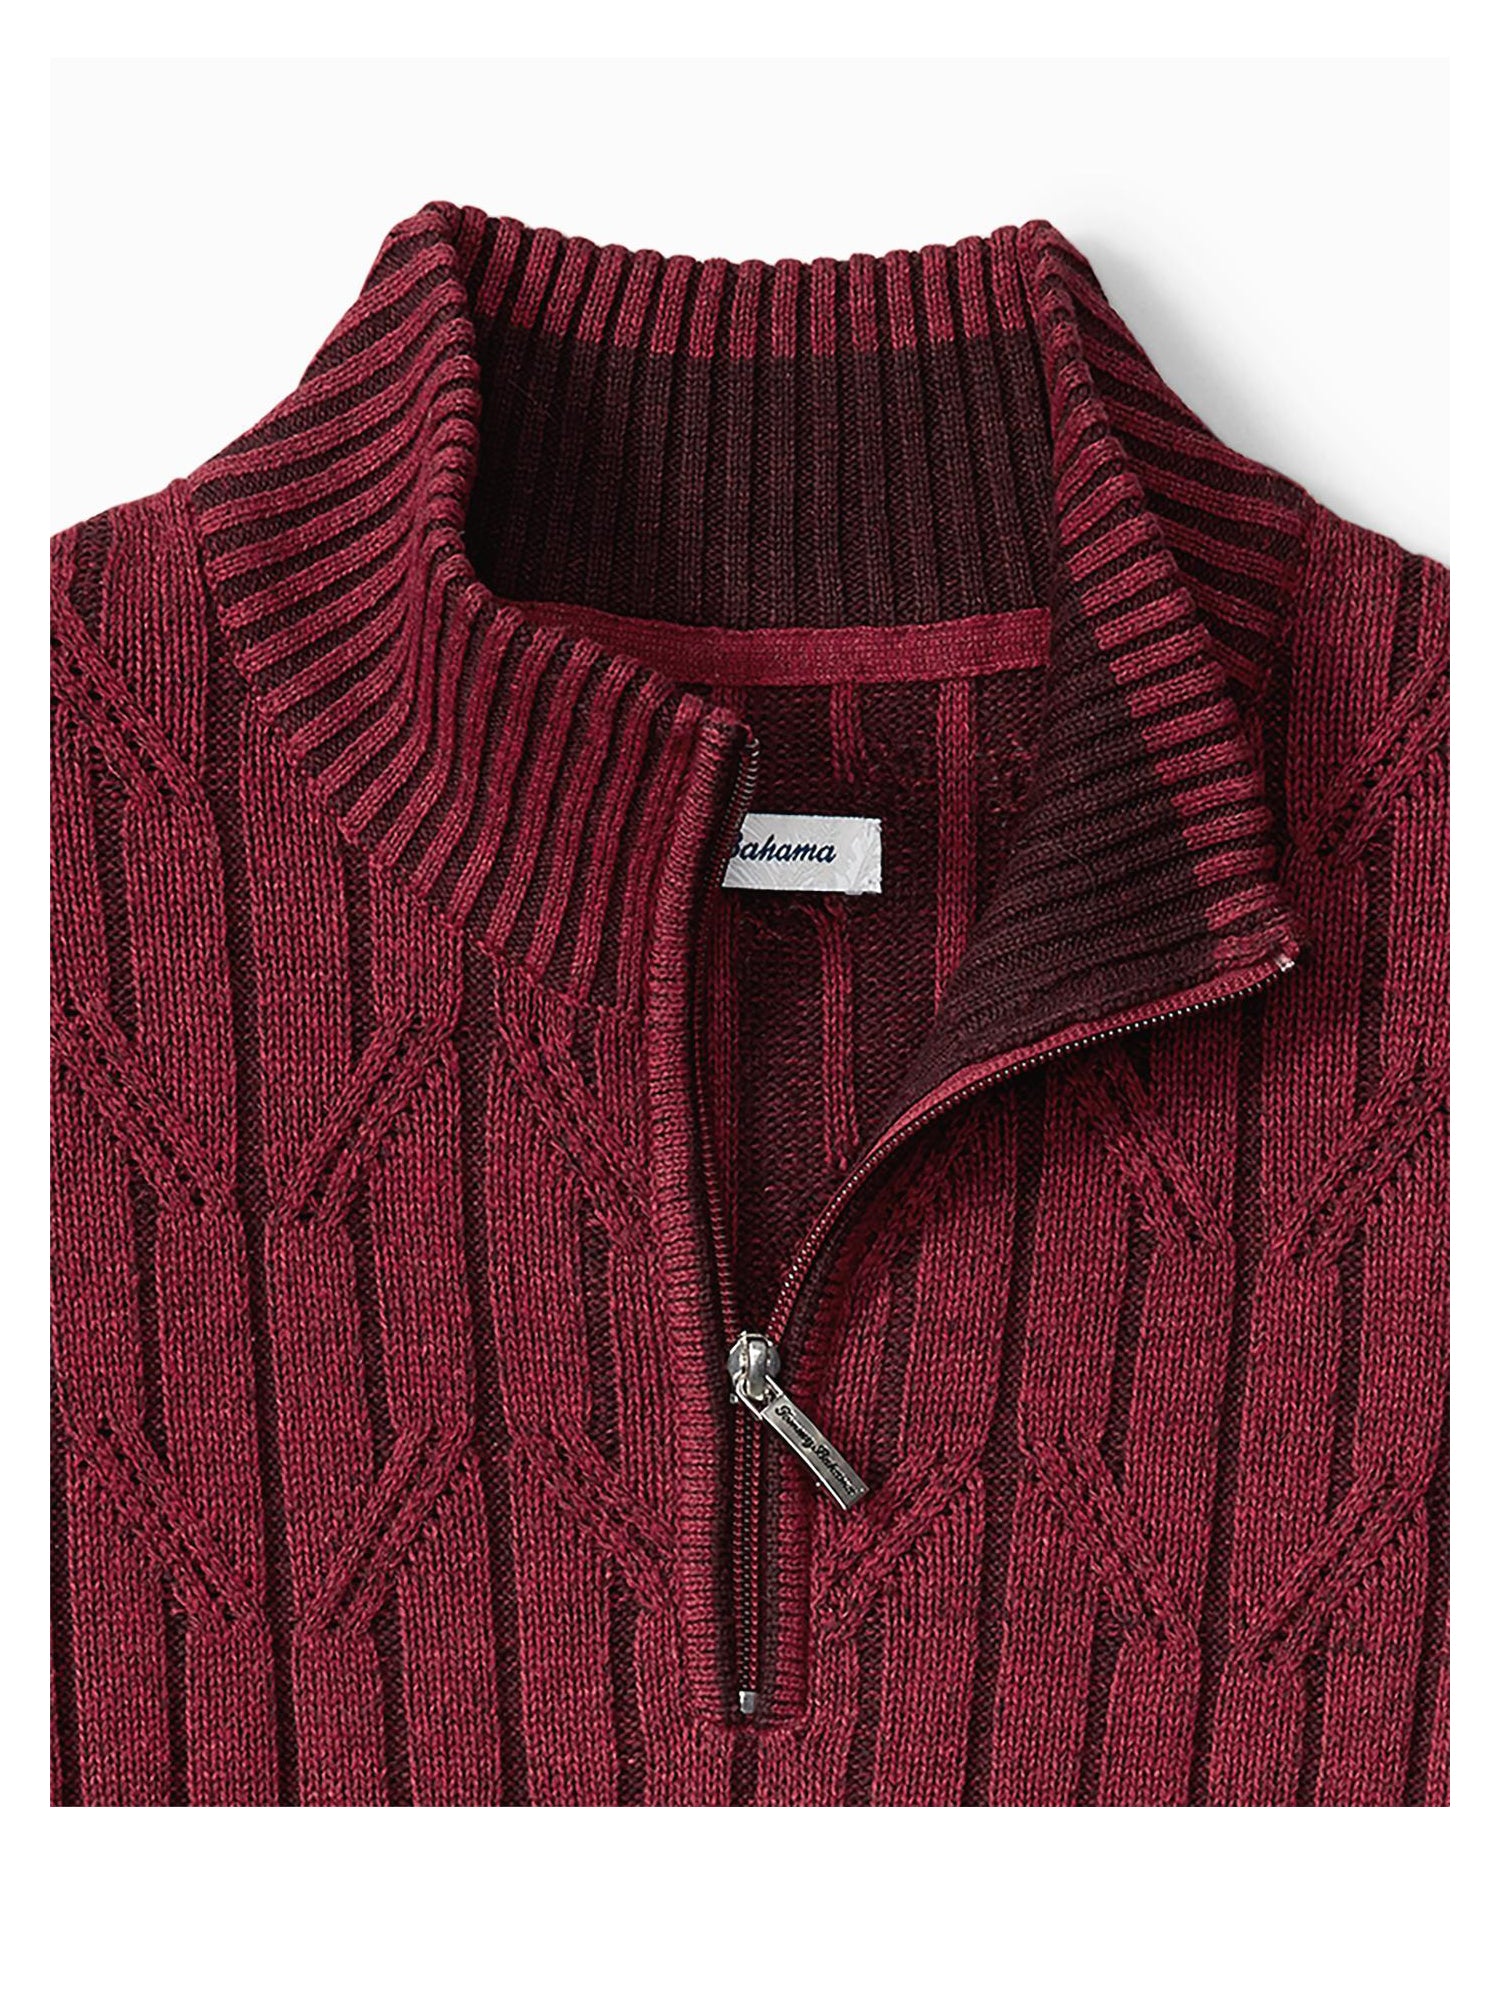 Tommy Bahama Deep Sea Half Zip Cable Sweater in Cherry Stone - 0